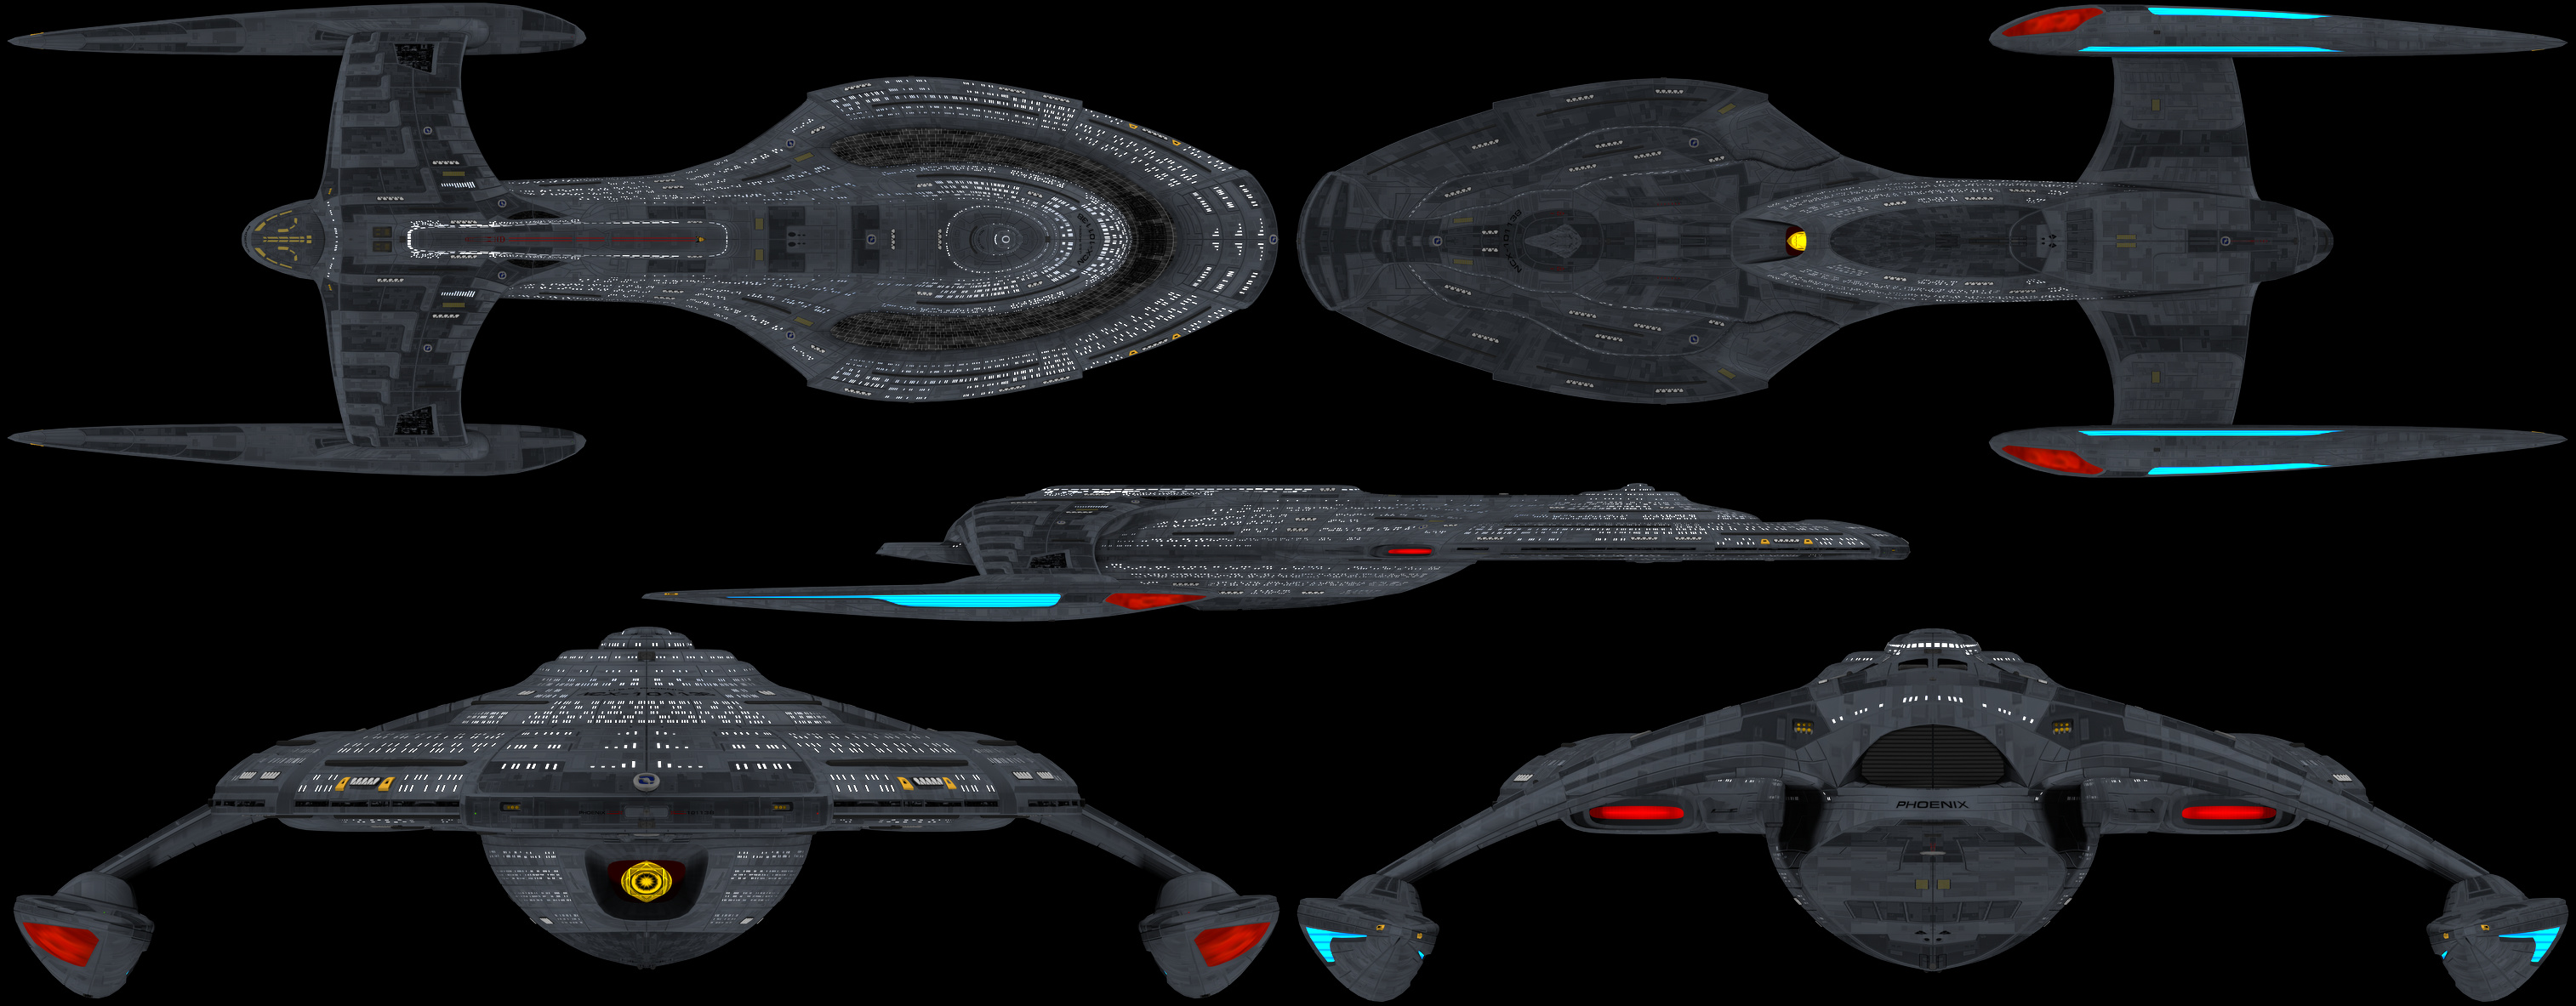 ascension_class_by_admiral_horton-d78osrf.jpg